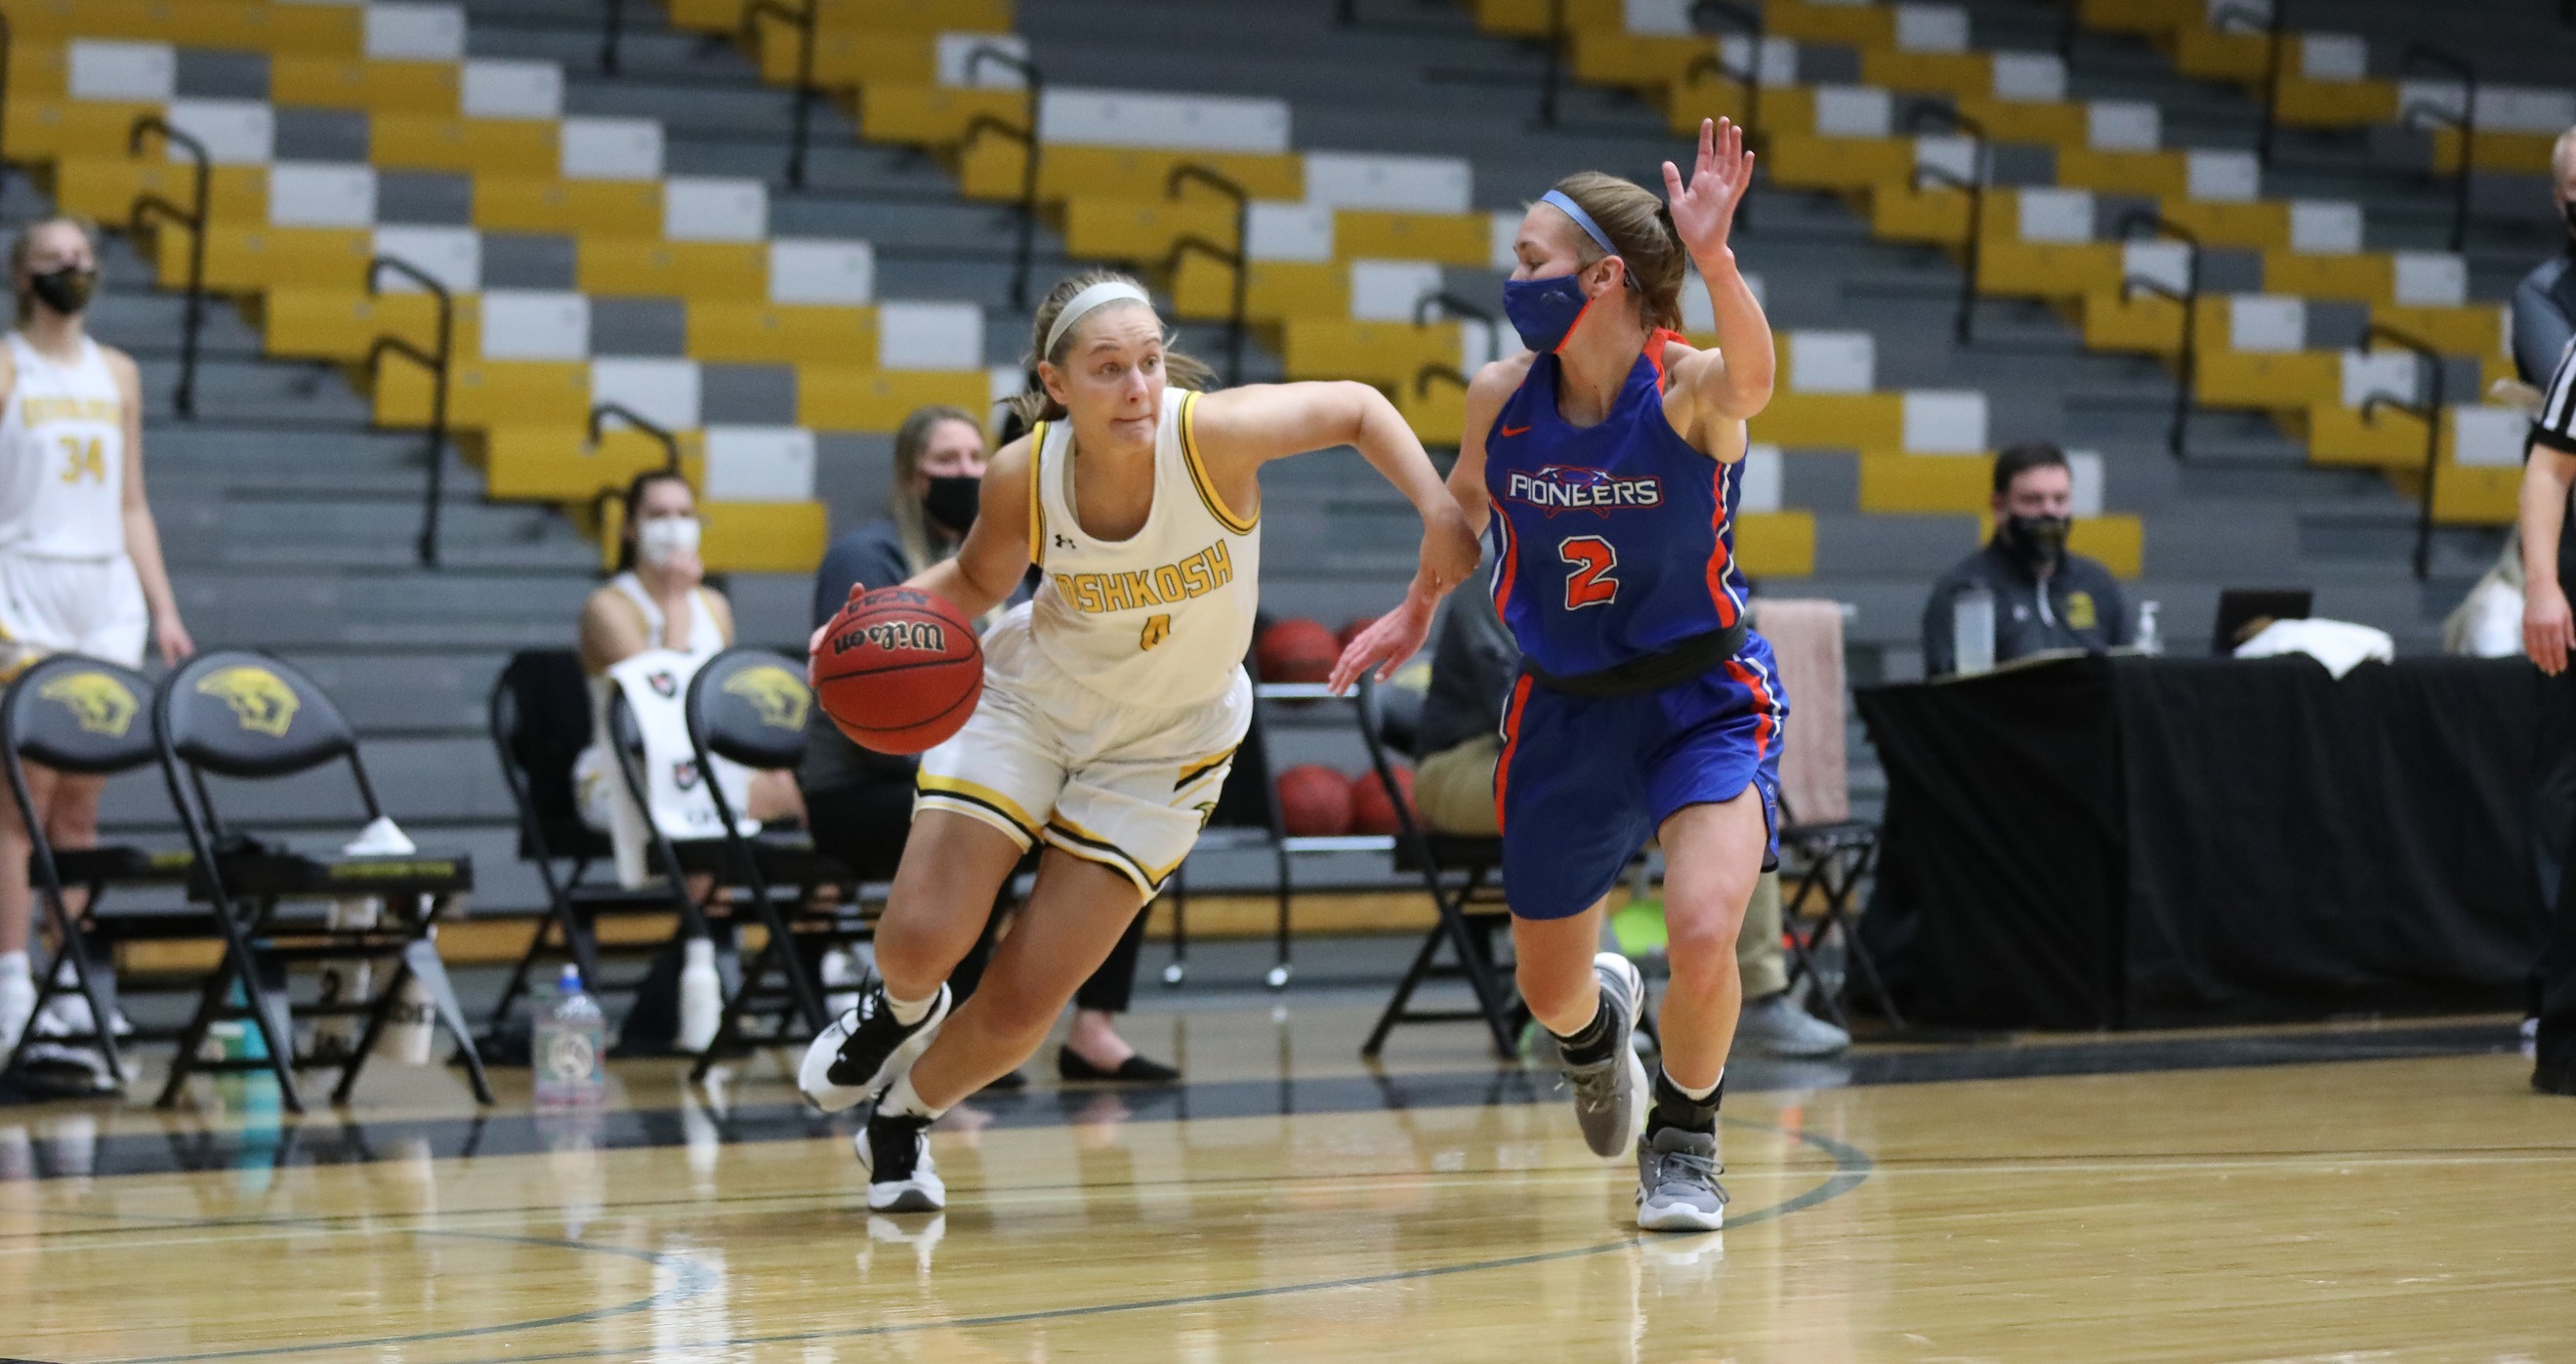 Jenna Jorgensen scored a career-high 11 points against the Pioneers.